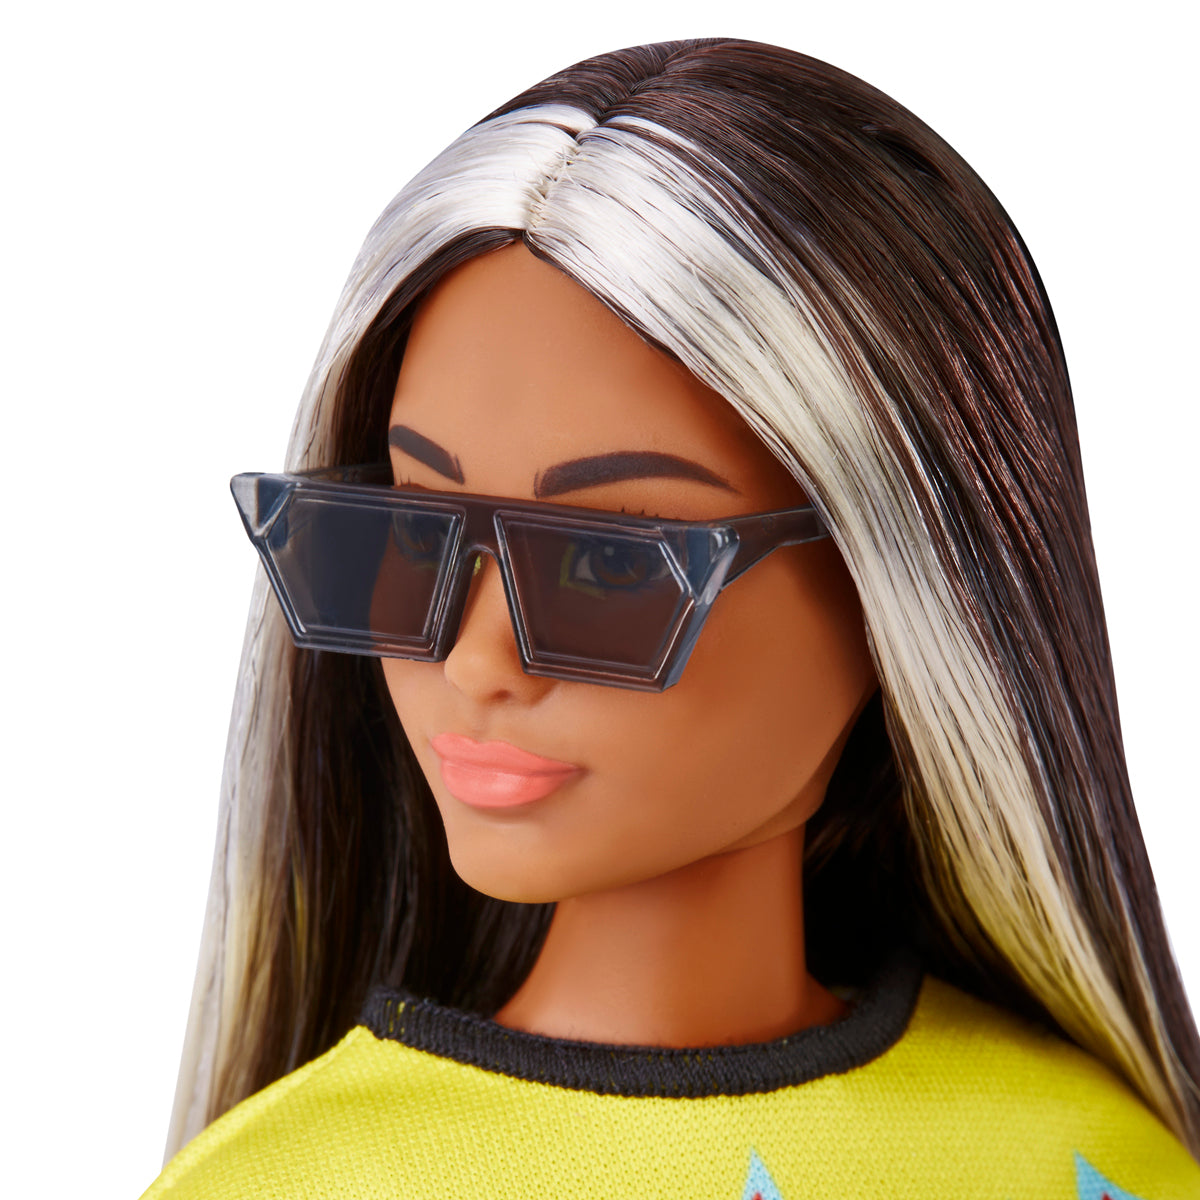 Barbie Fashionistas Doll - Flame Crop Top and Checkered Skirt